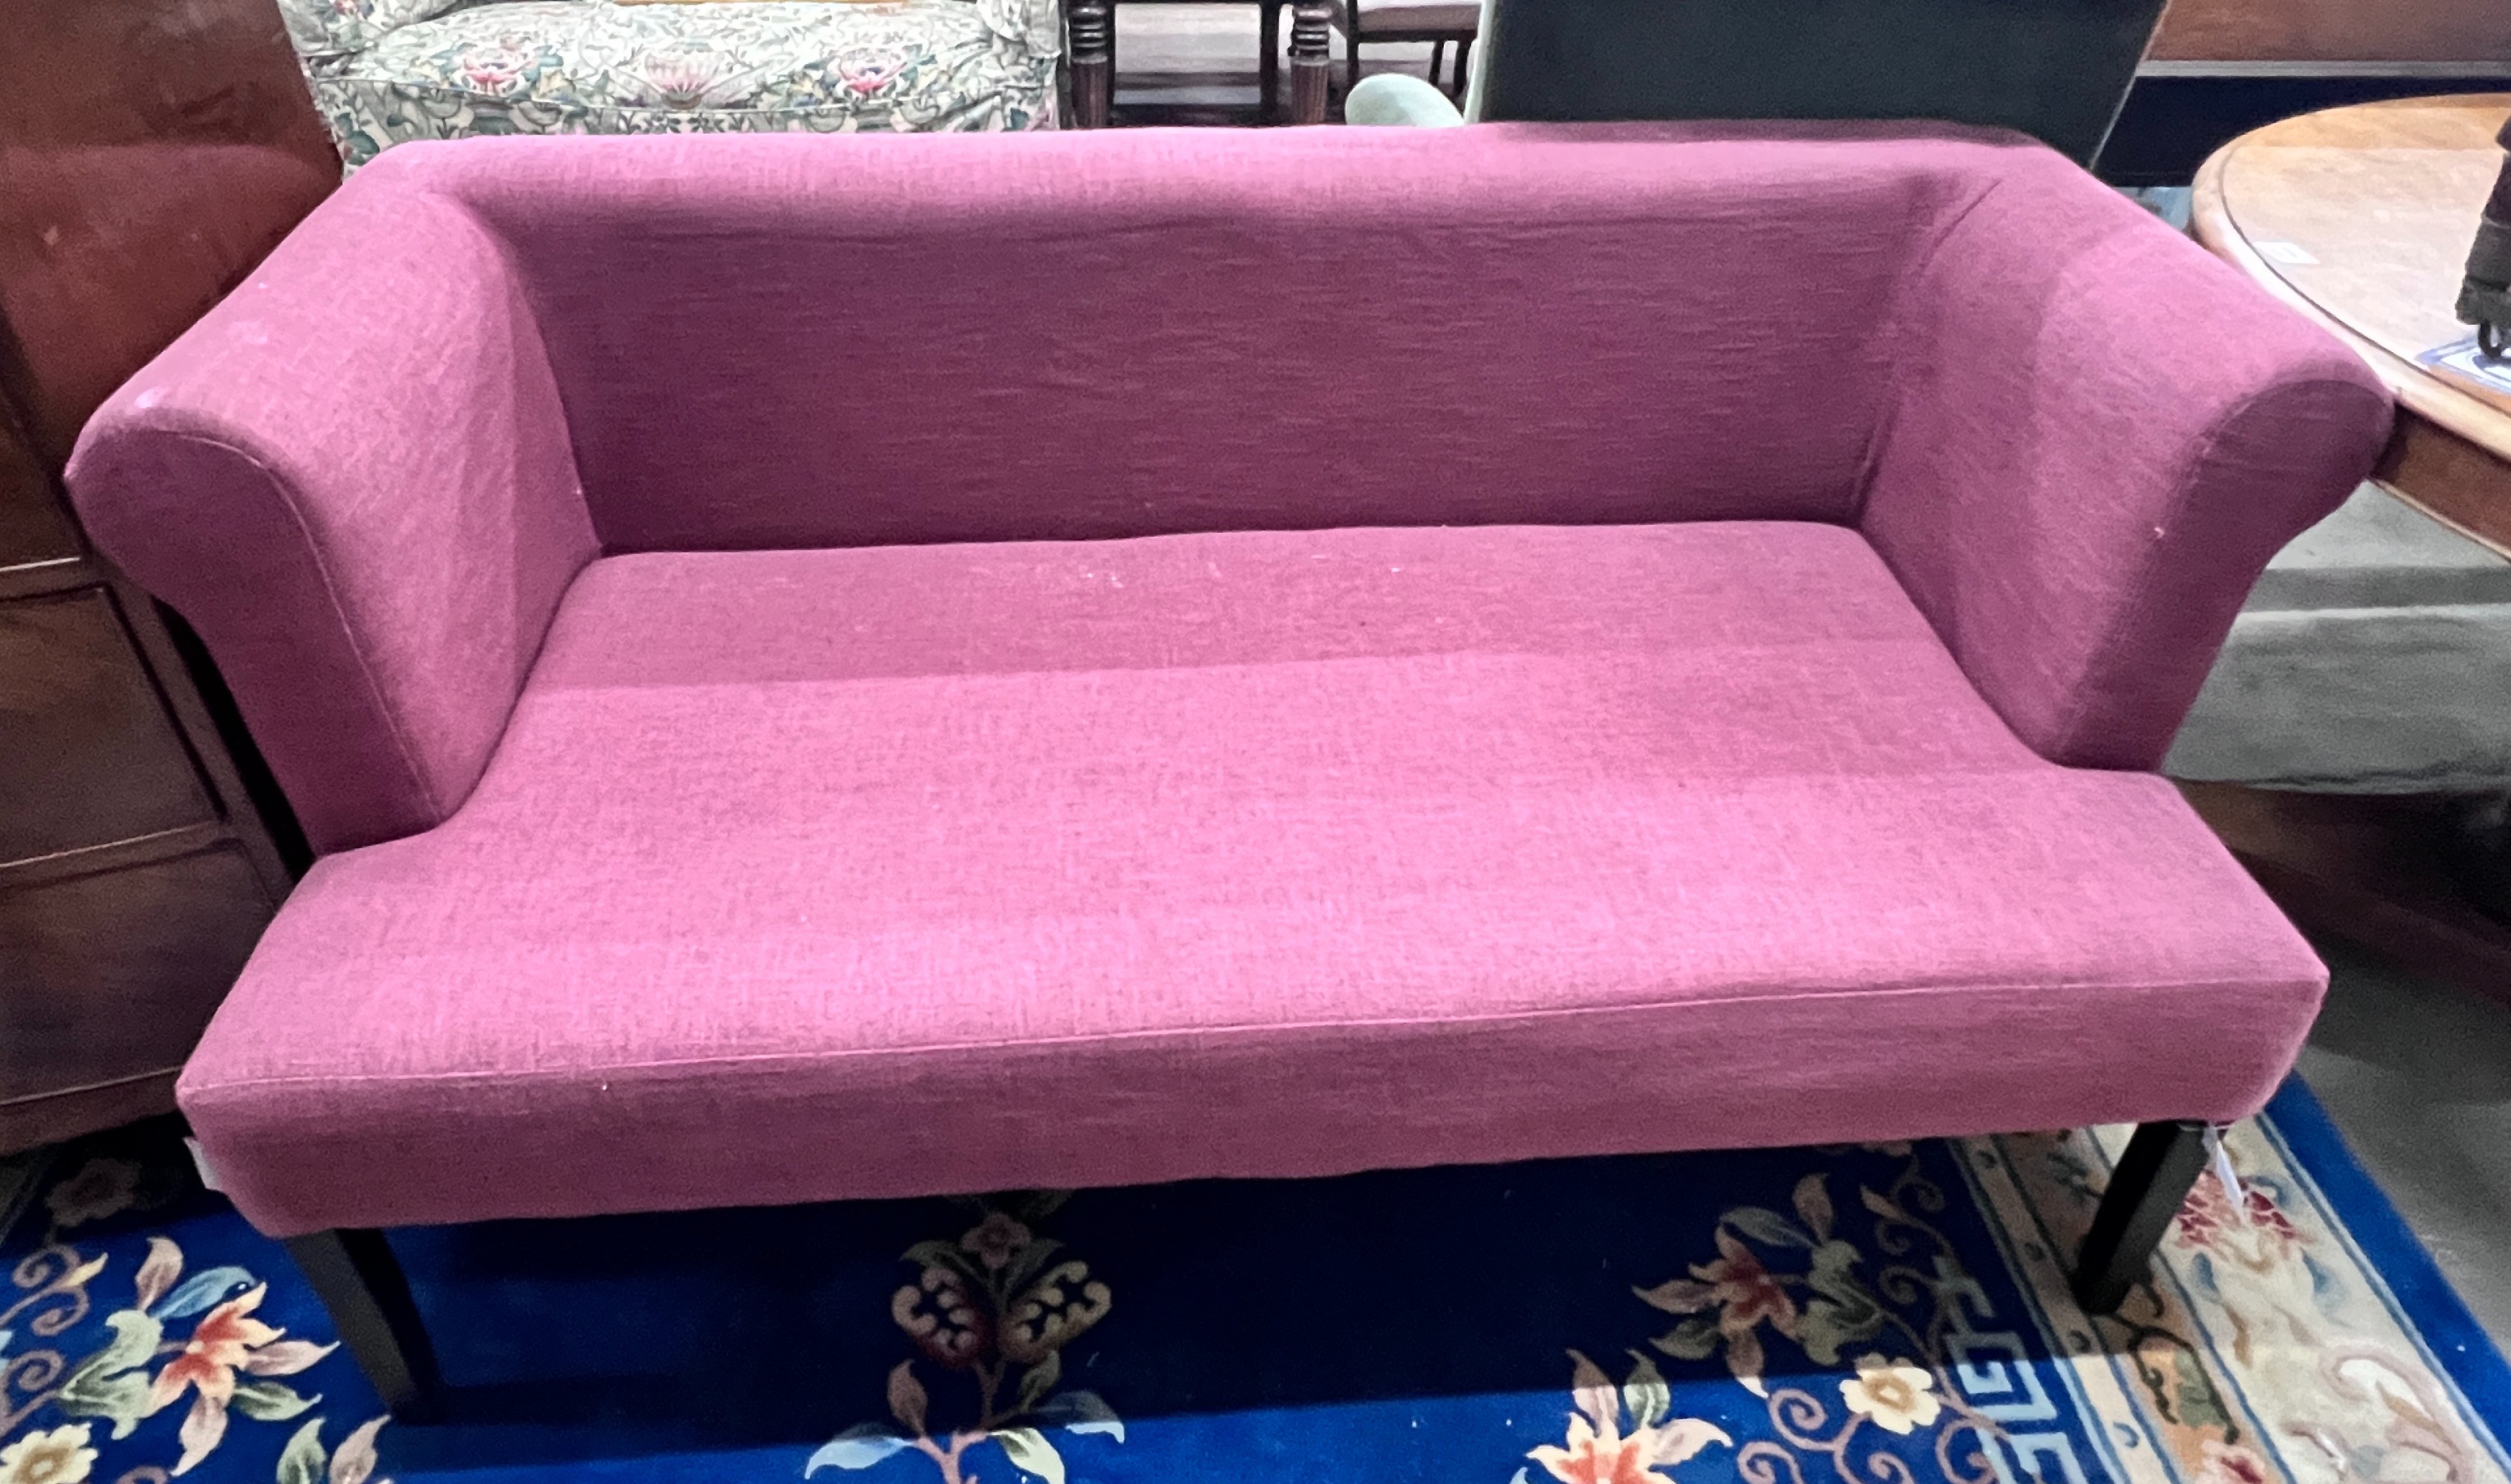 A contemporary Ambience settee upholstered in a plum fabric on square tapered legs, length 150cm, depth 70cm, height 75cm